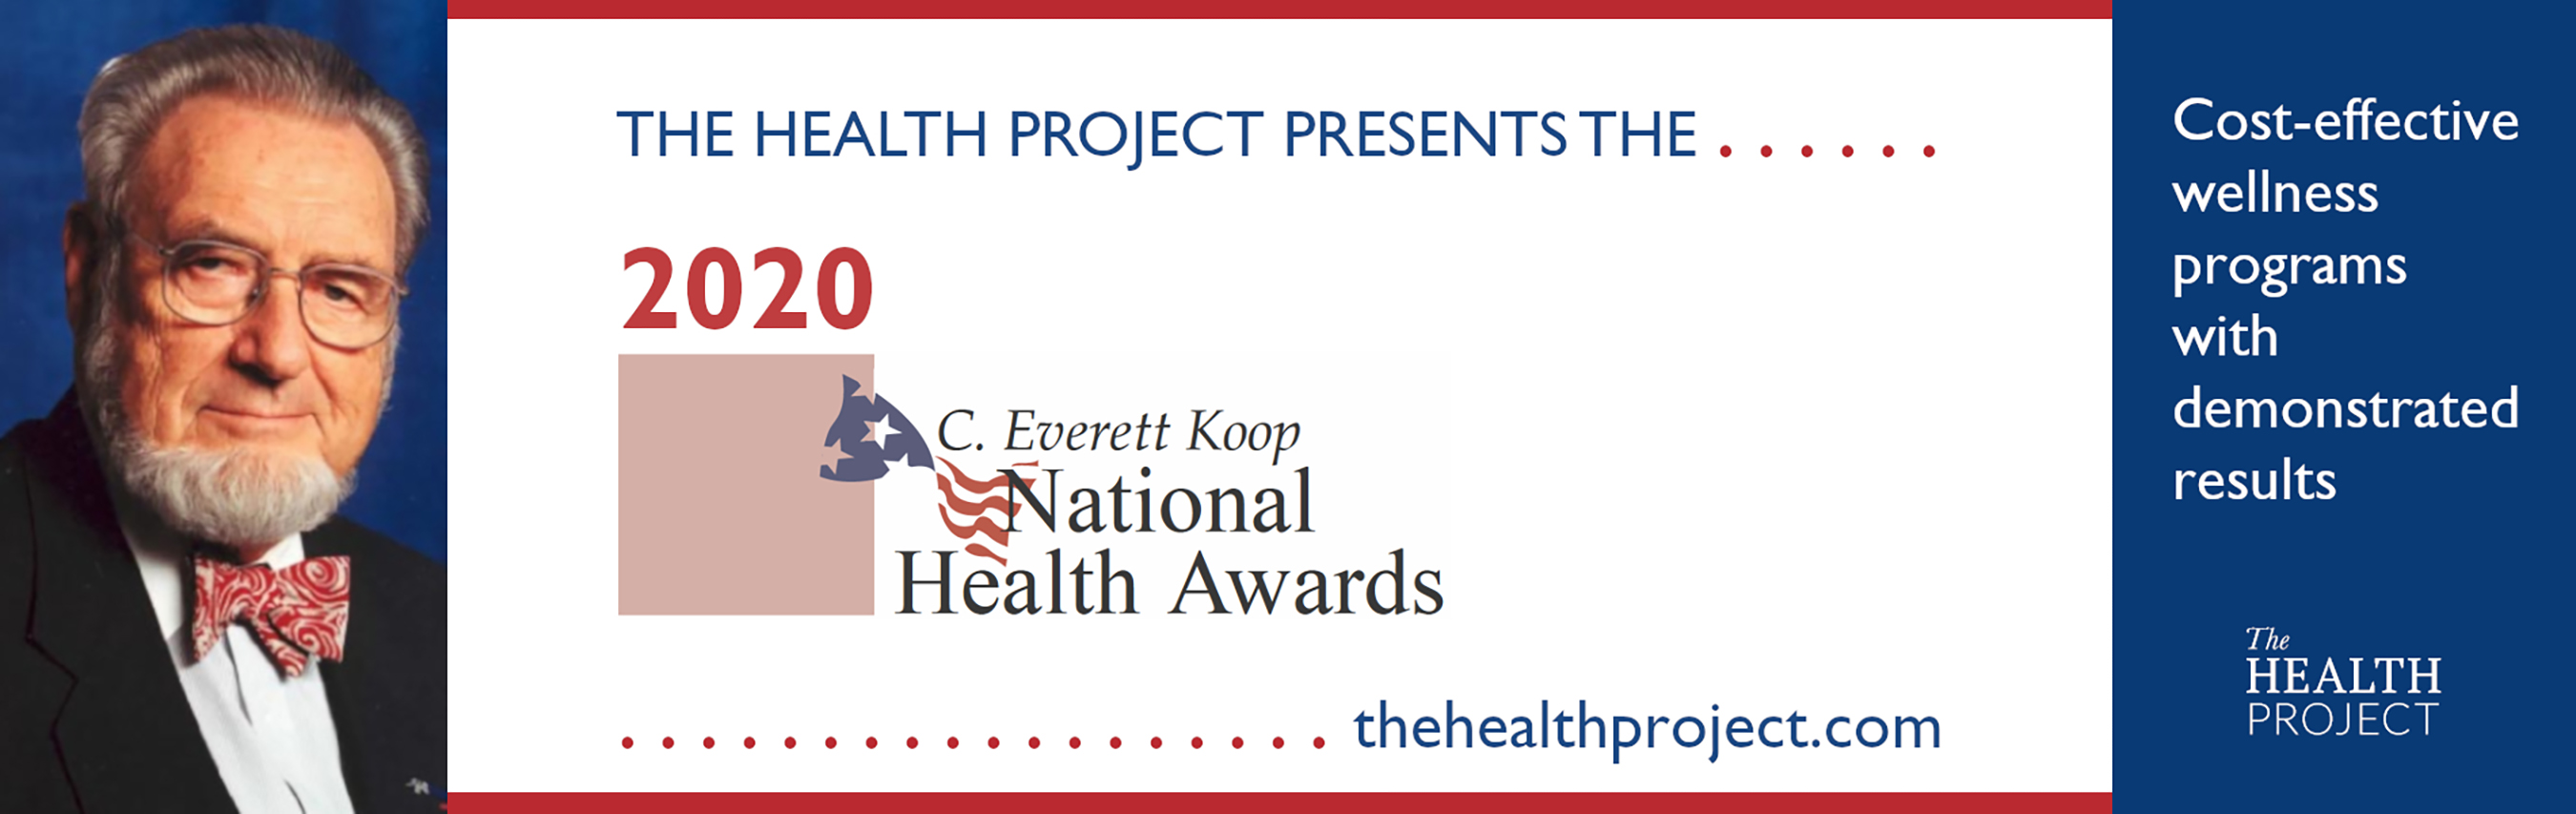 The Health Project Hero